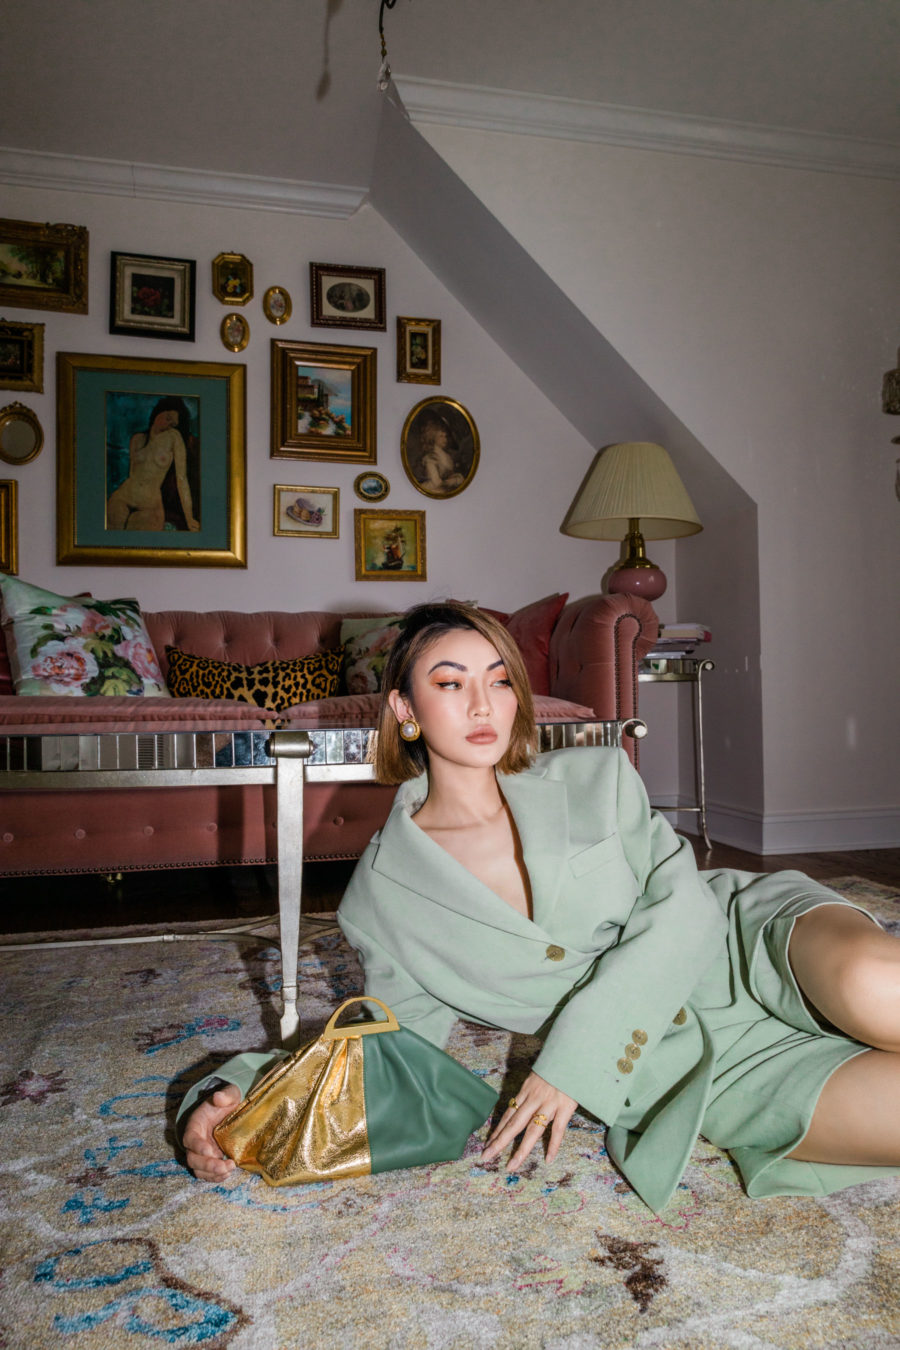 fashion blogger jessica wang shares the most stylish outfits from farfetch wearing acne blazer and long shorts with paris texas purple heels // Notjessfashion.com